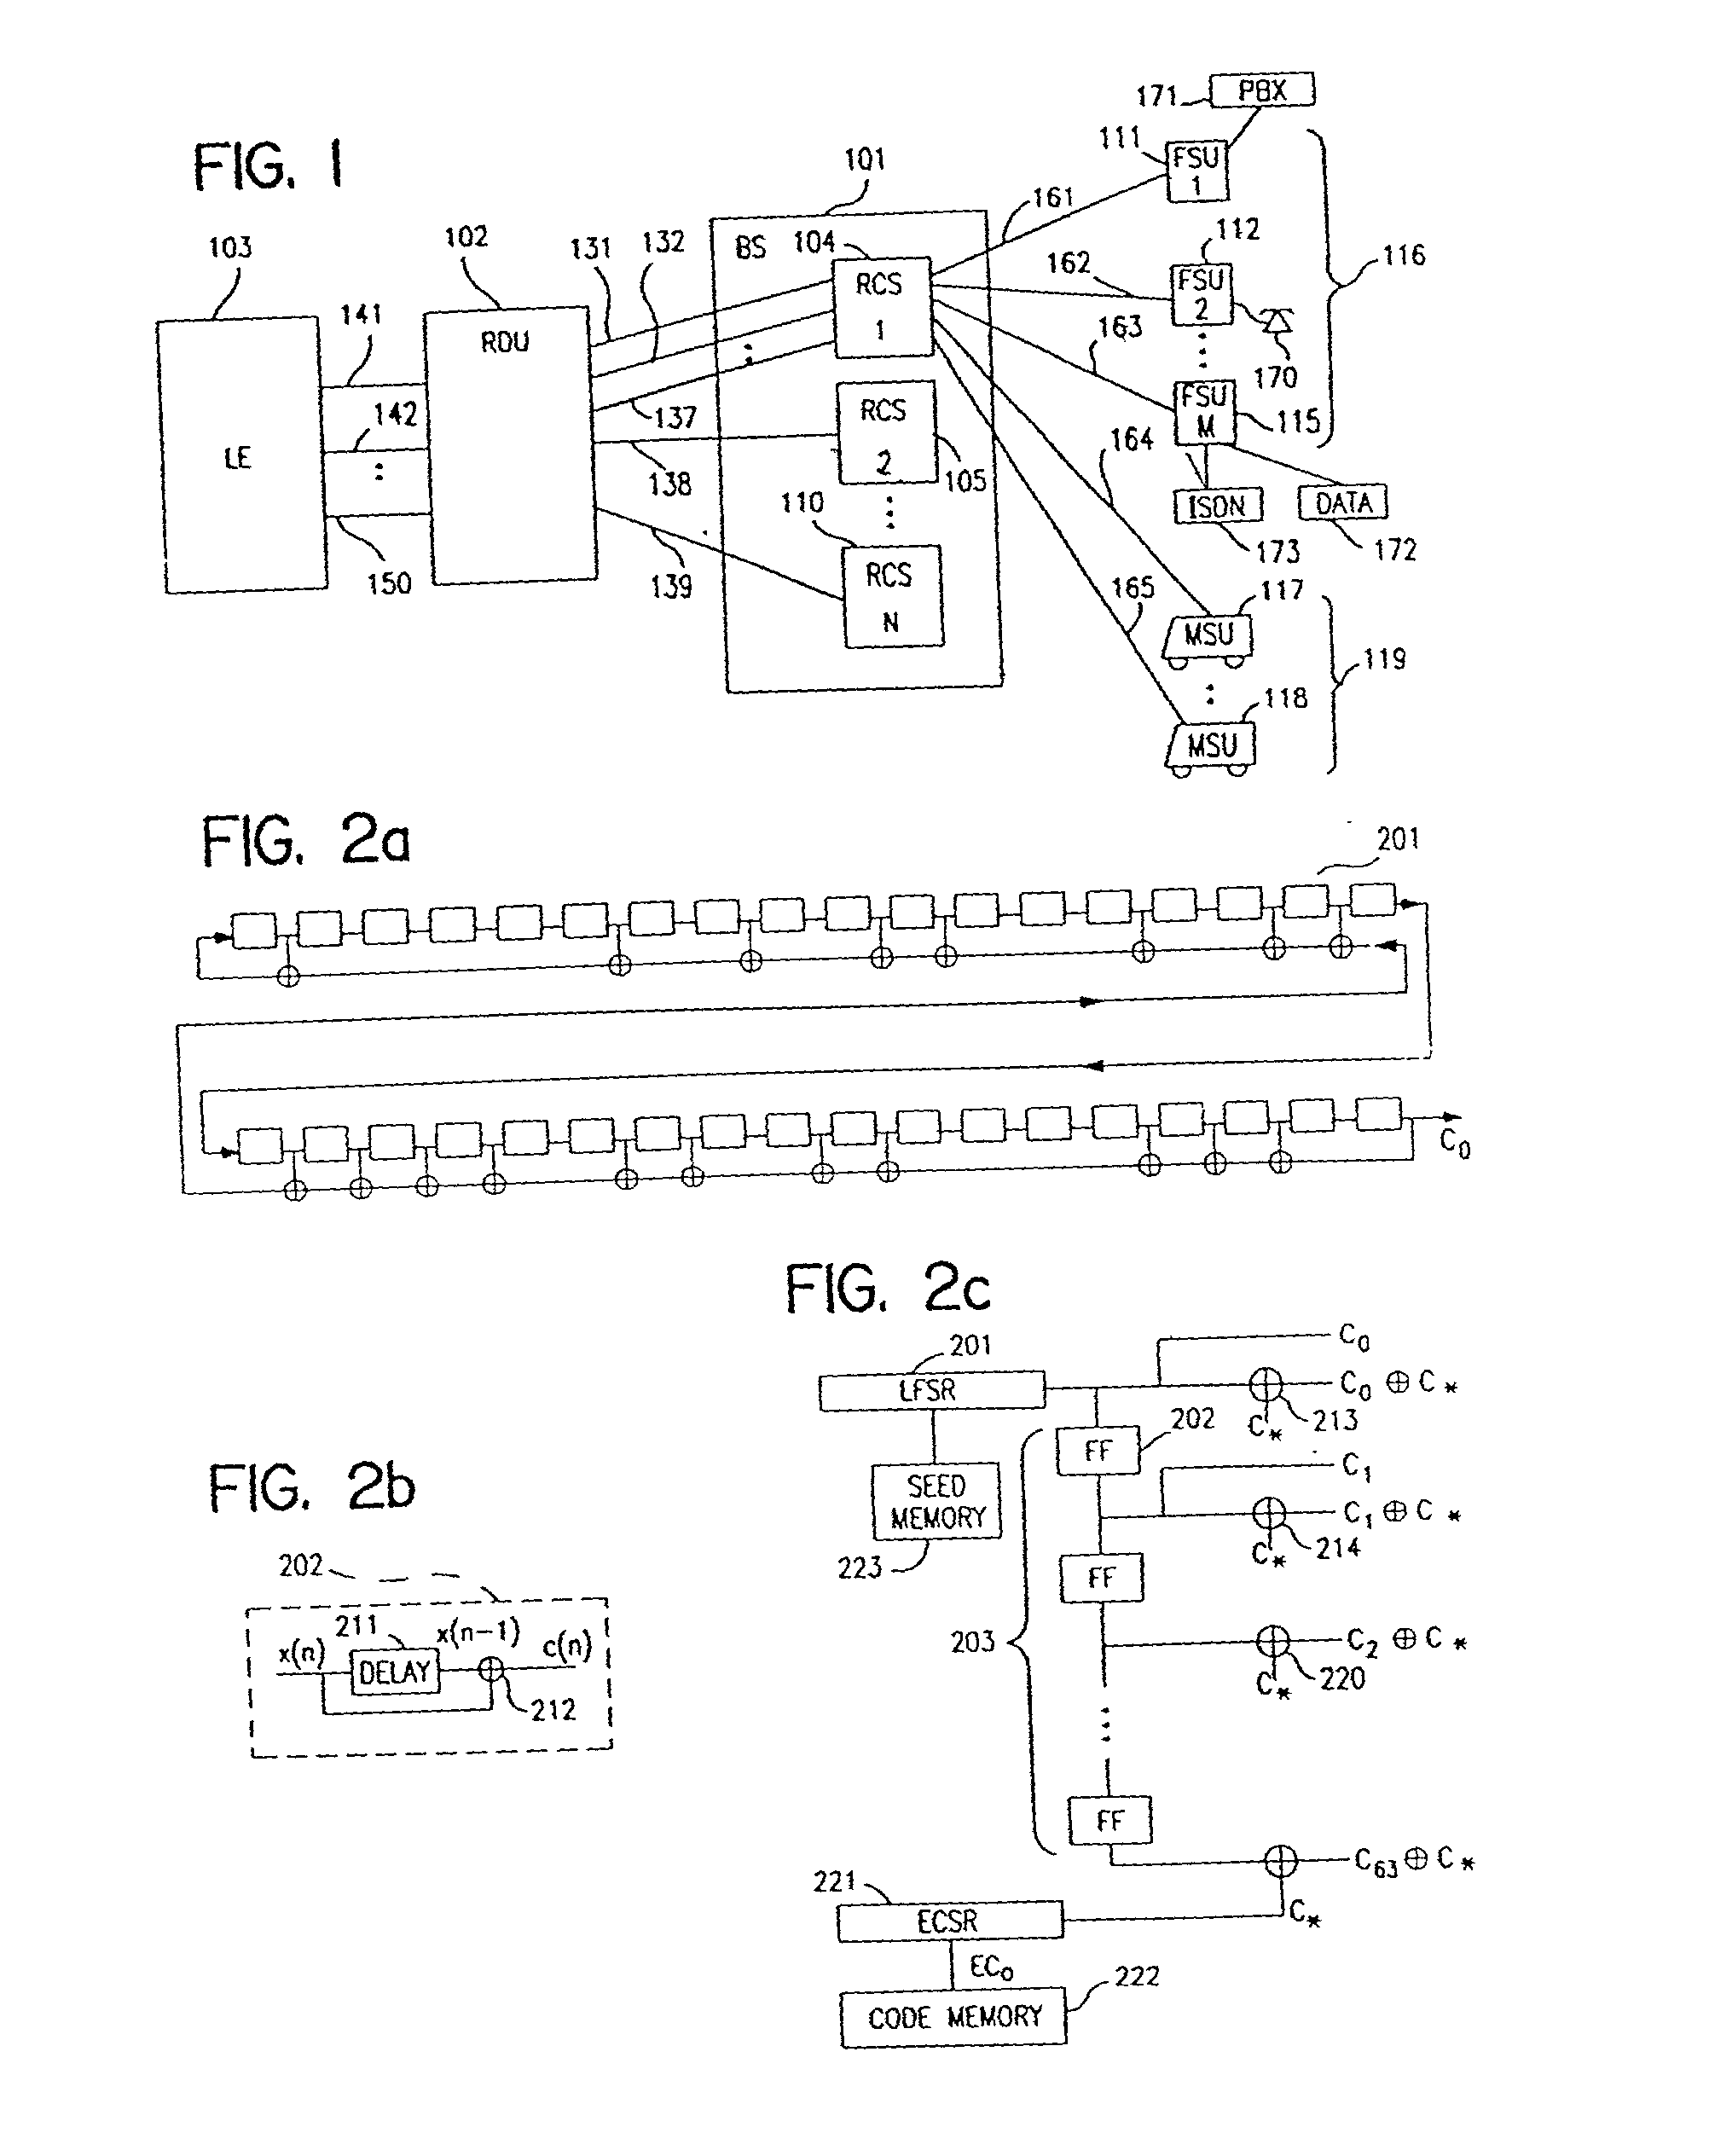 Apparatus for initial power control for spread-spectrum communications